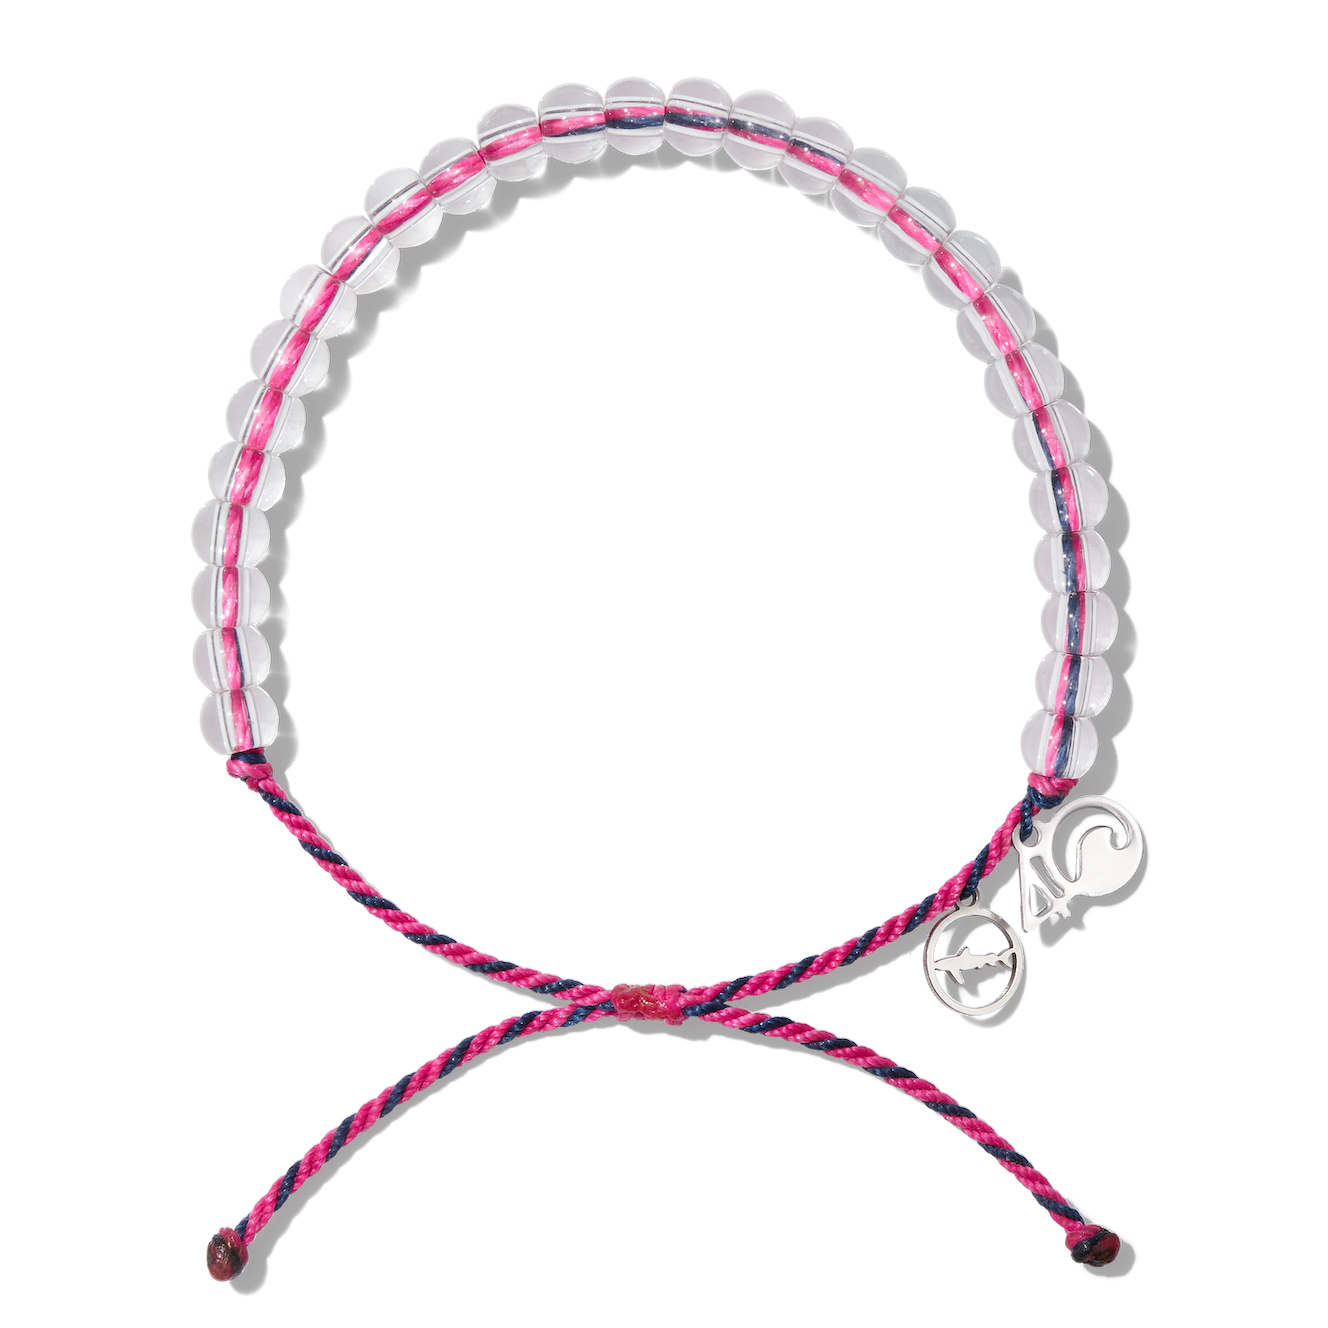 4Ocean Blue Shark Bracelet, with pink and black recycled plastic cord, colorless recycled glass beads, and recycled steel metal charms.